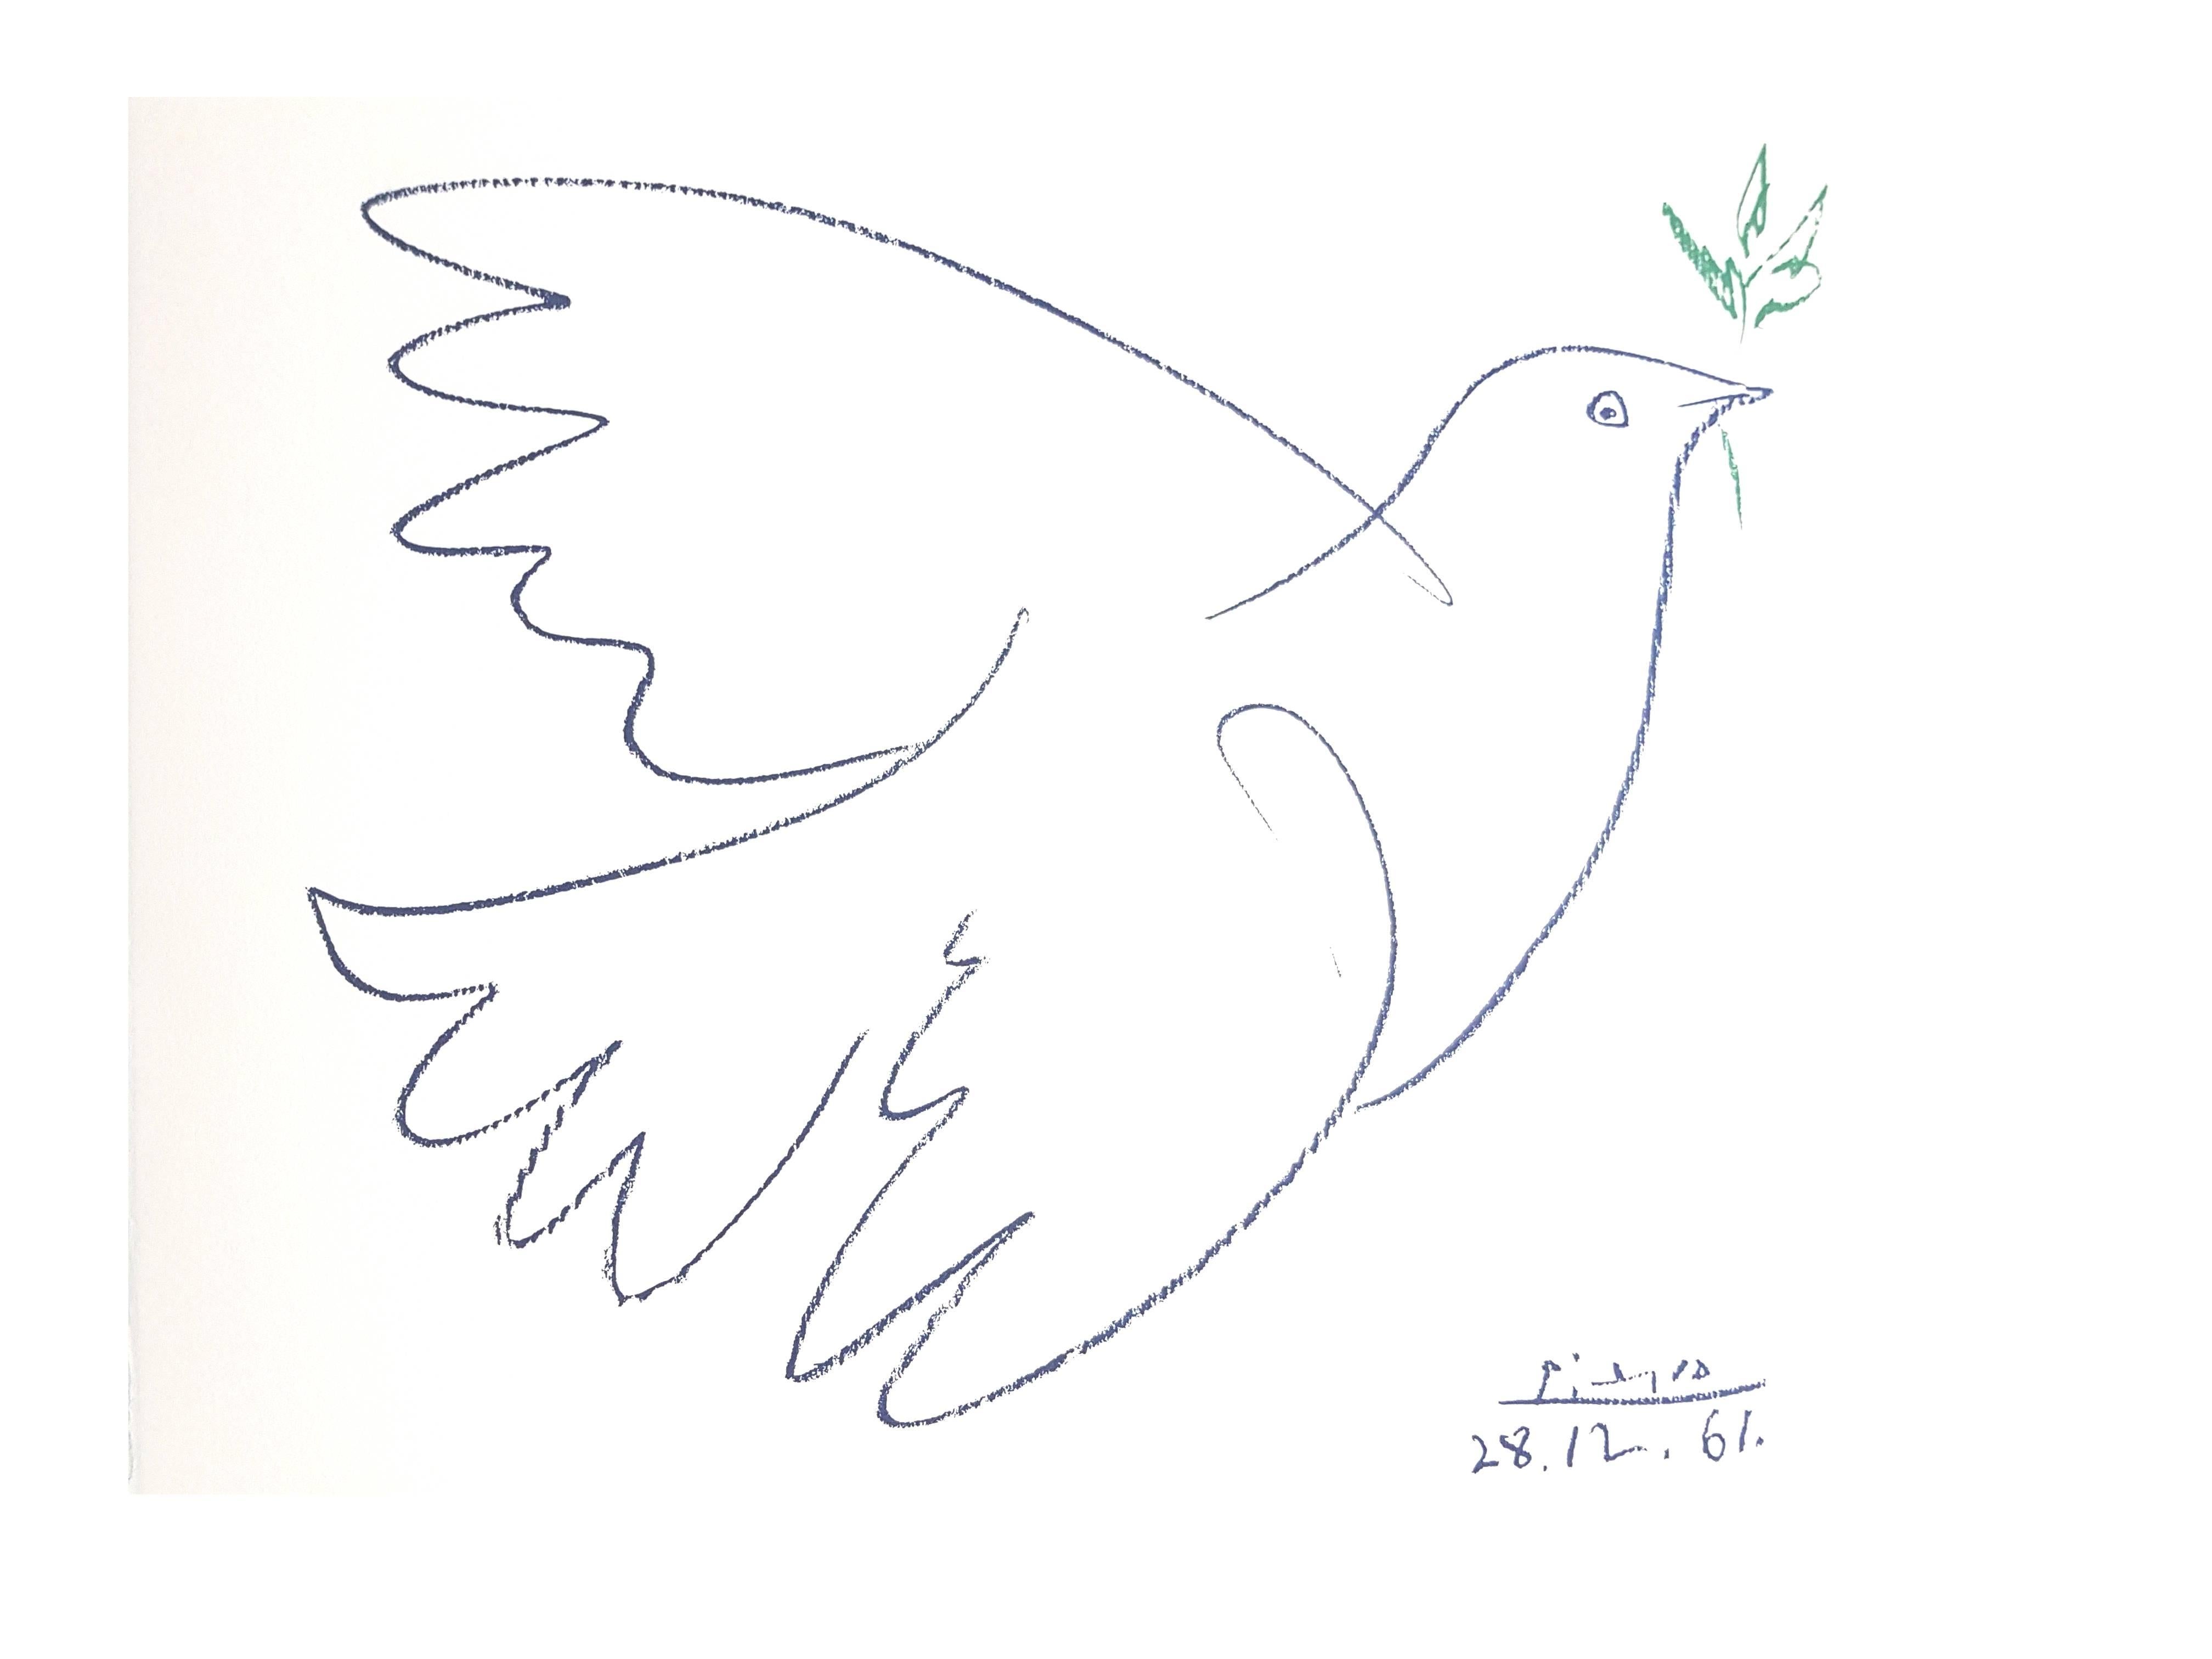 After Pablo Picasso - Peace Dove - Lithograph - Surrealist Print by (after) Pablo Picasso